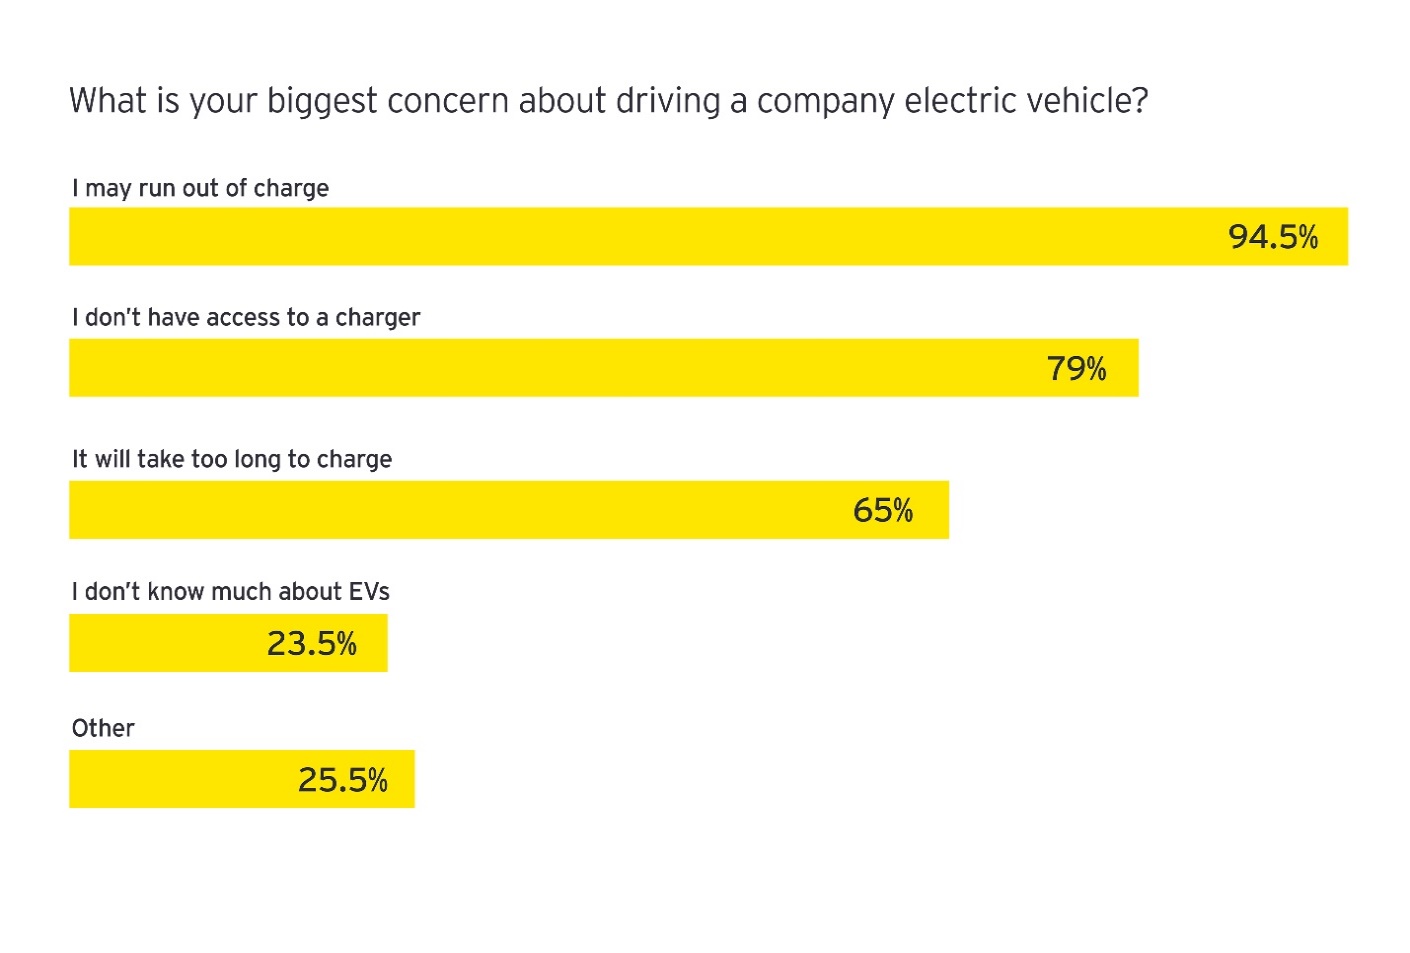 EV charging plan polling graphs answering "what is your biggest concern about driving a company electric vehicle? Here are the replies: 94.5% answered "I may run out of charge" 79% answered "I don't have access to a charger" 65% answered "It will take too long to charge" 23.5% answered "I don't know much about EVs" 25.5% answered "Other."